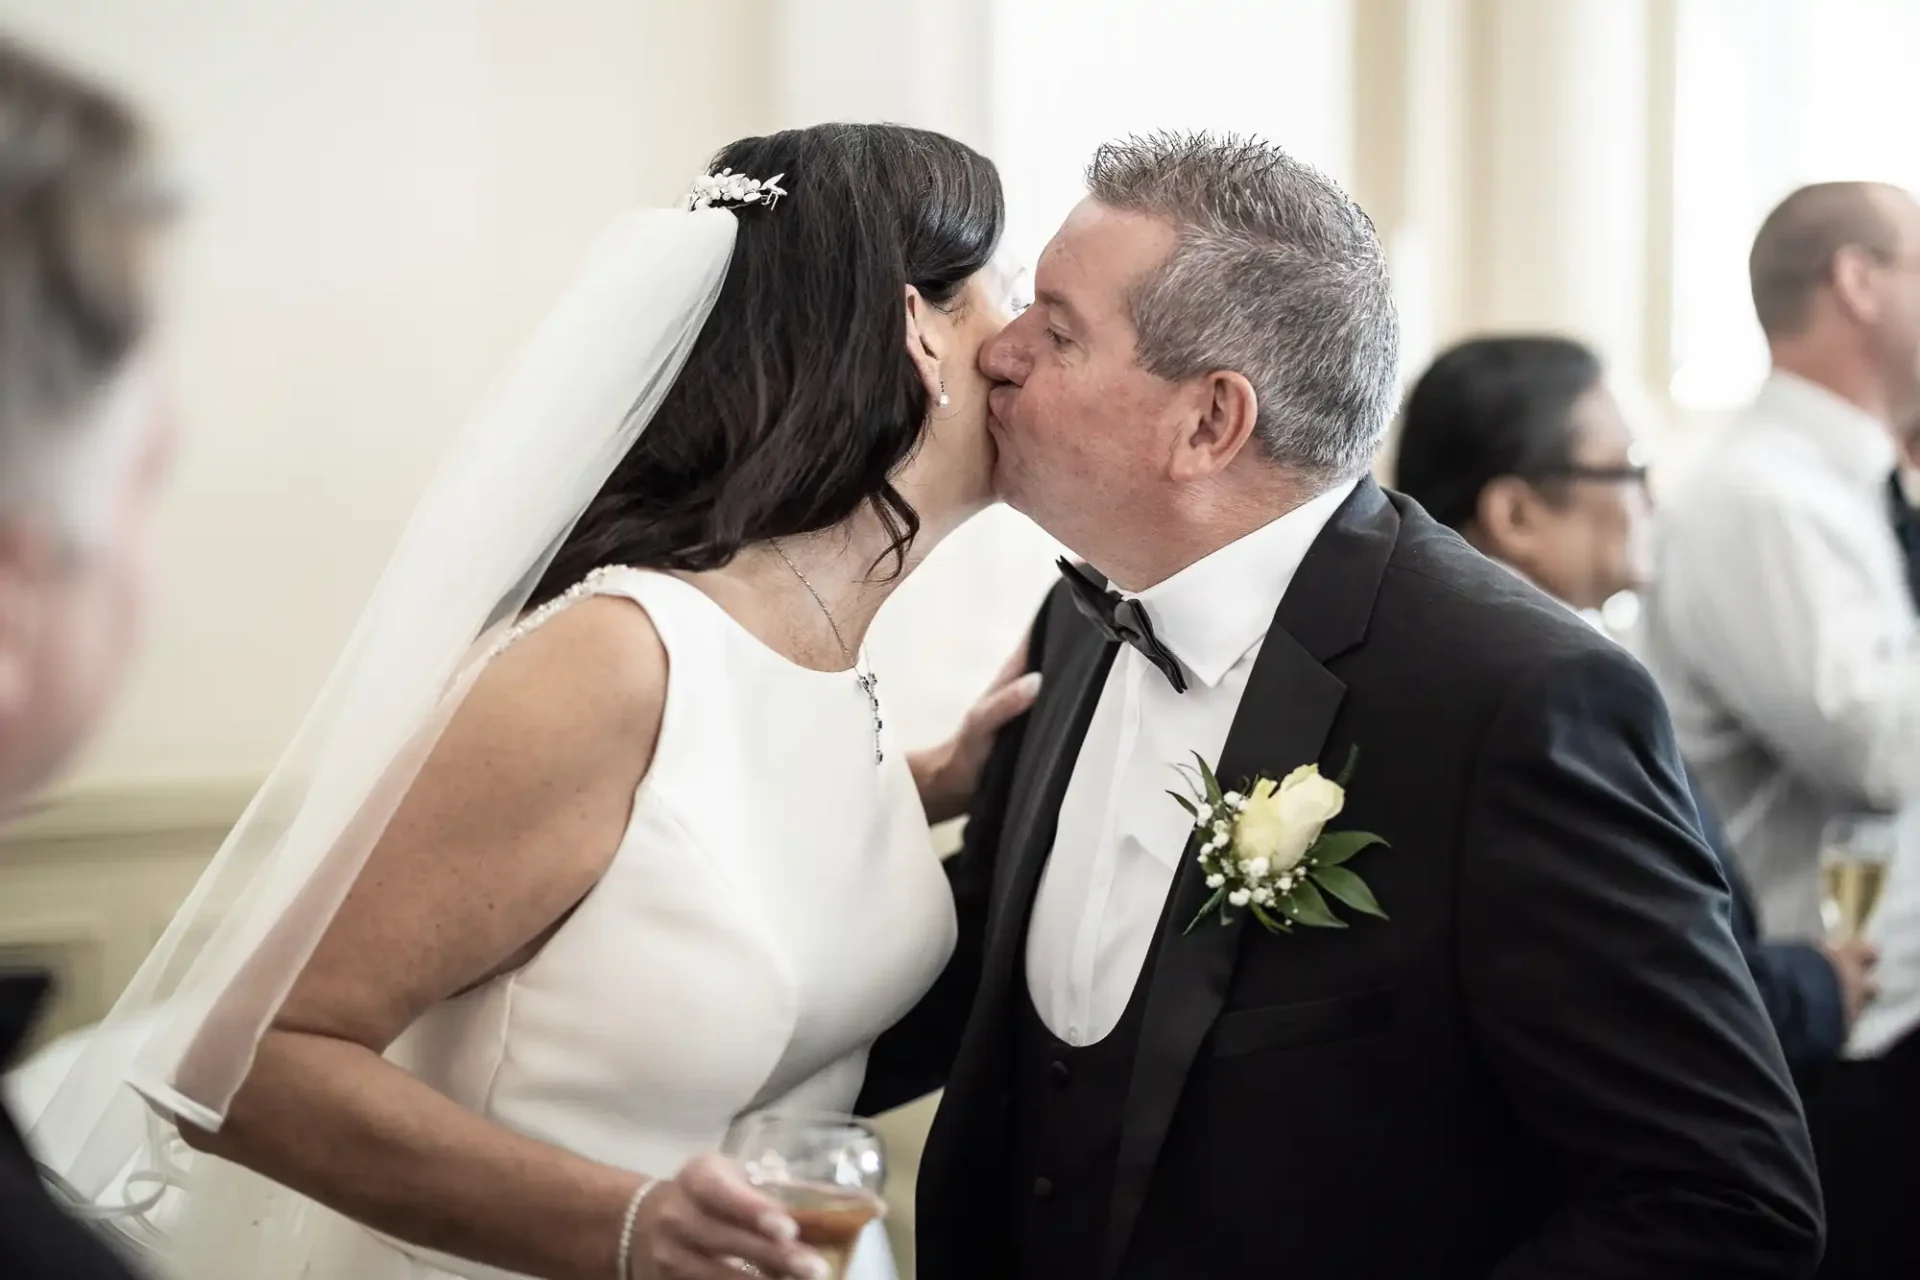 A bride and groom sharing a kiss at their wedding reception, with guests in the background.